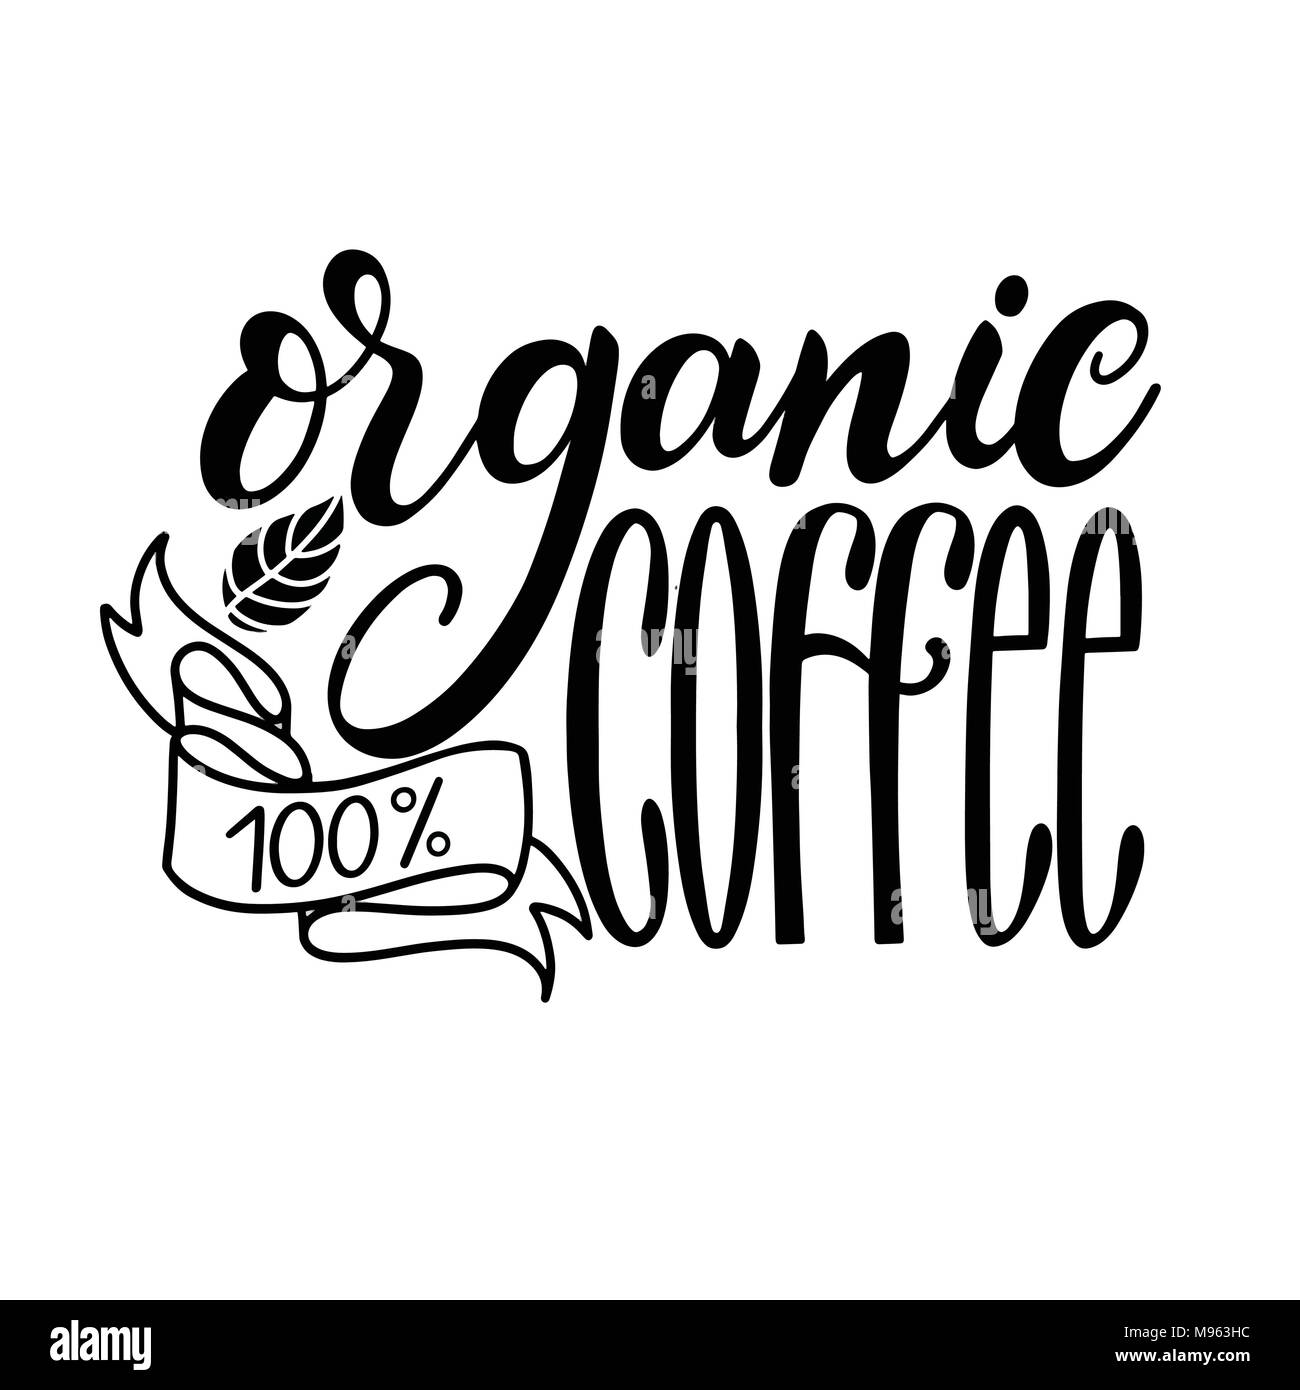 Lettering Fresh Organic Coffee 100. Calligraphic handdrawn sign. Coffee quote Stock Vector